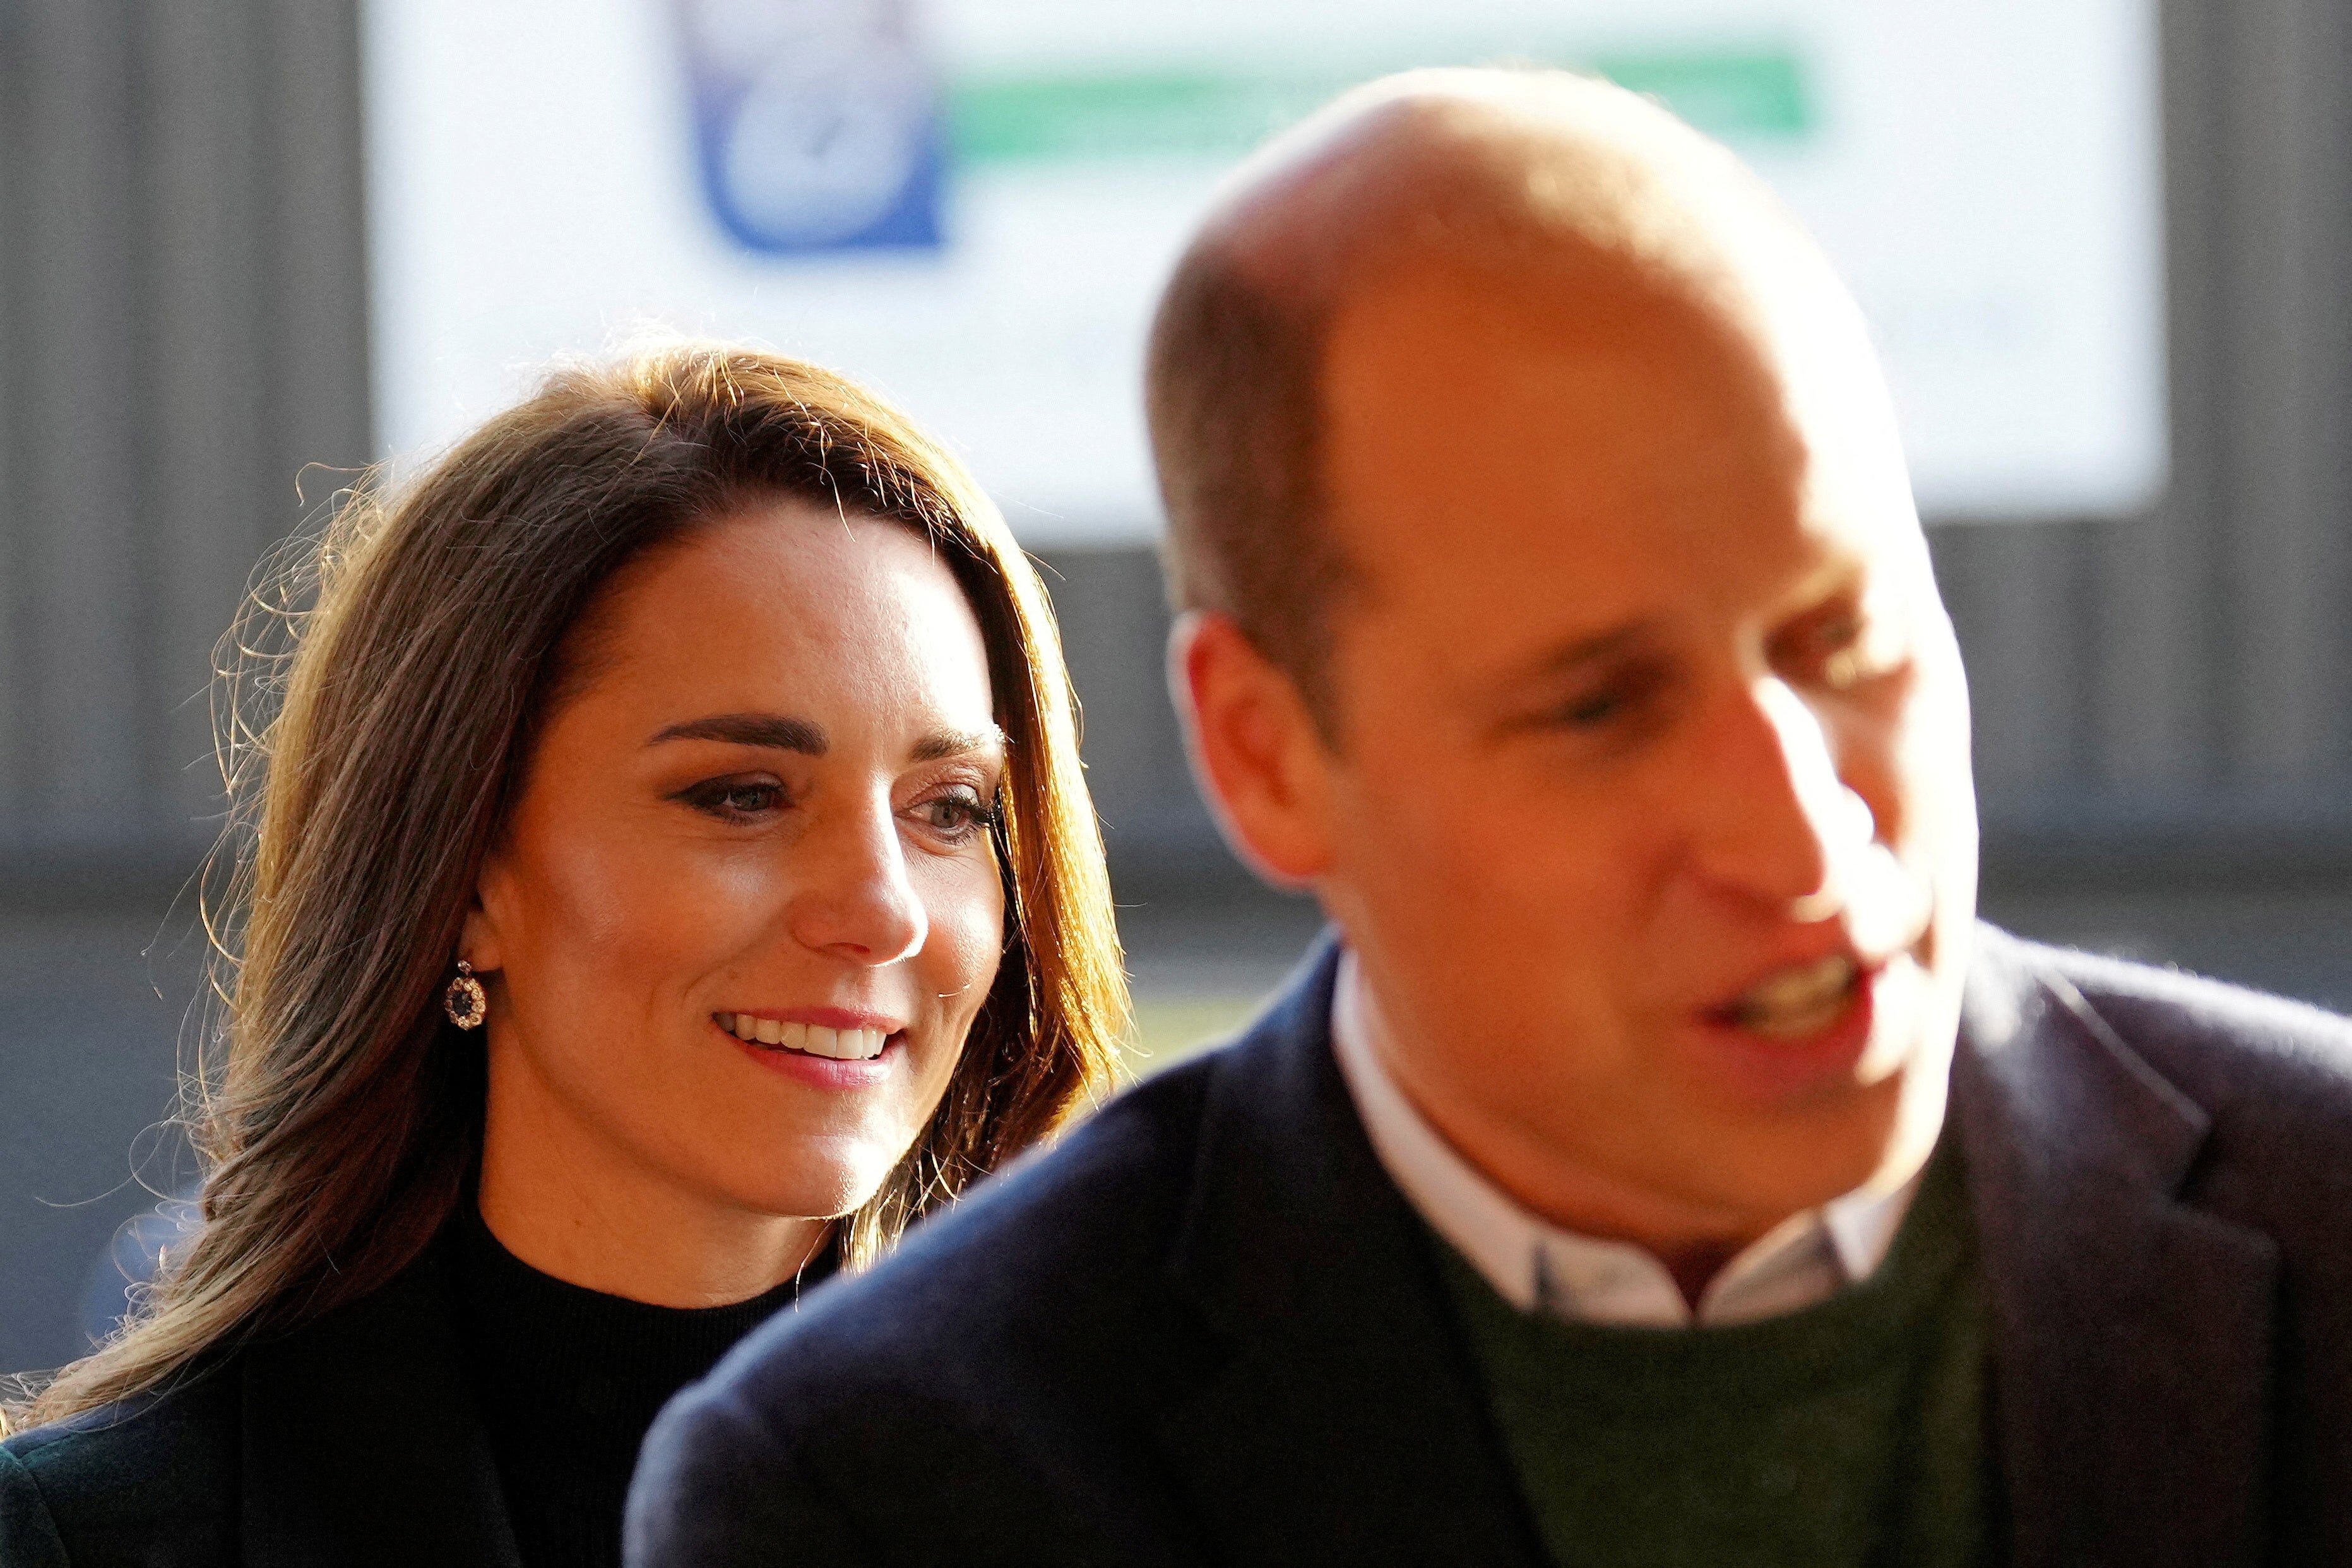 Kate attended the private school Marlborough College and then the University of St. Andrews in Scotland, where she met William around 2001